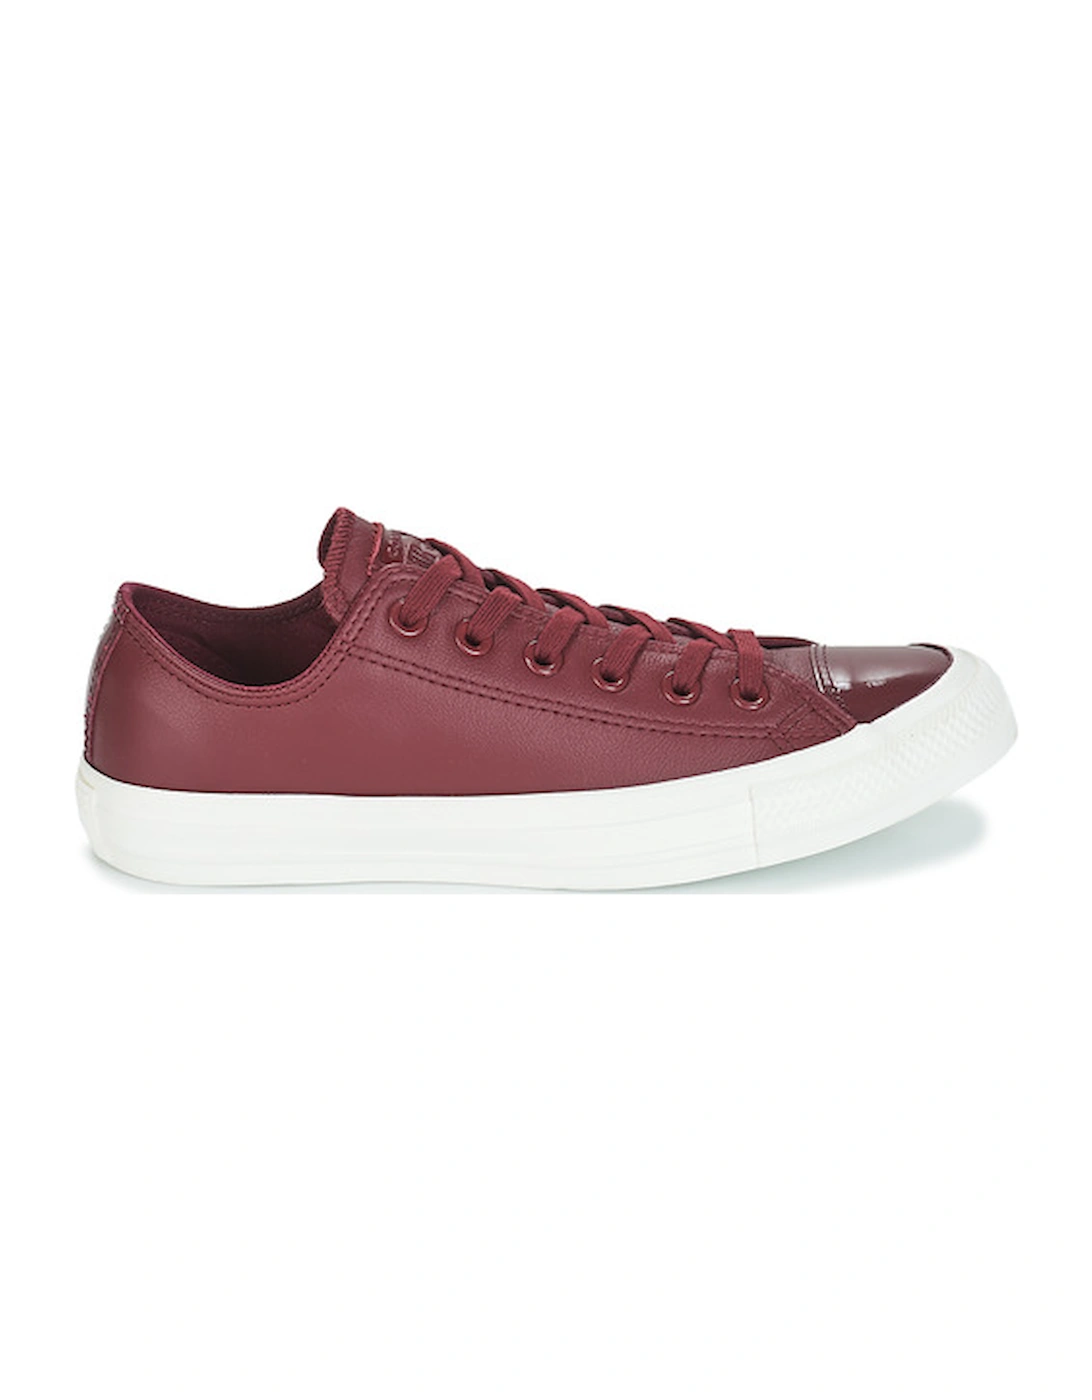 CHUCK TAYLOR ALL STAR LEATHER OX